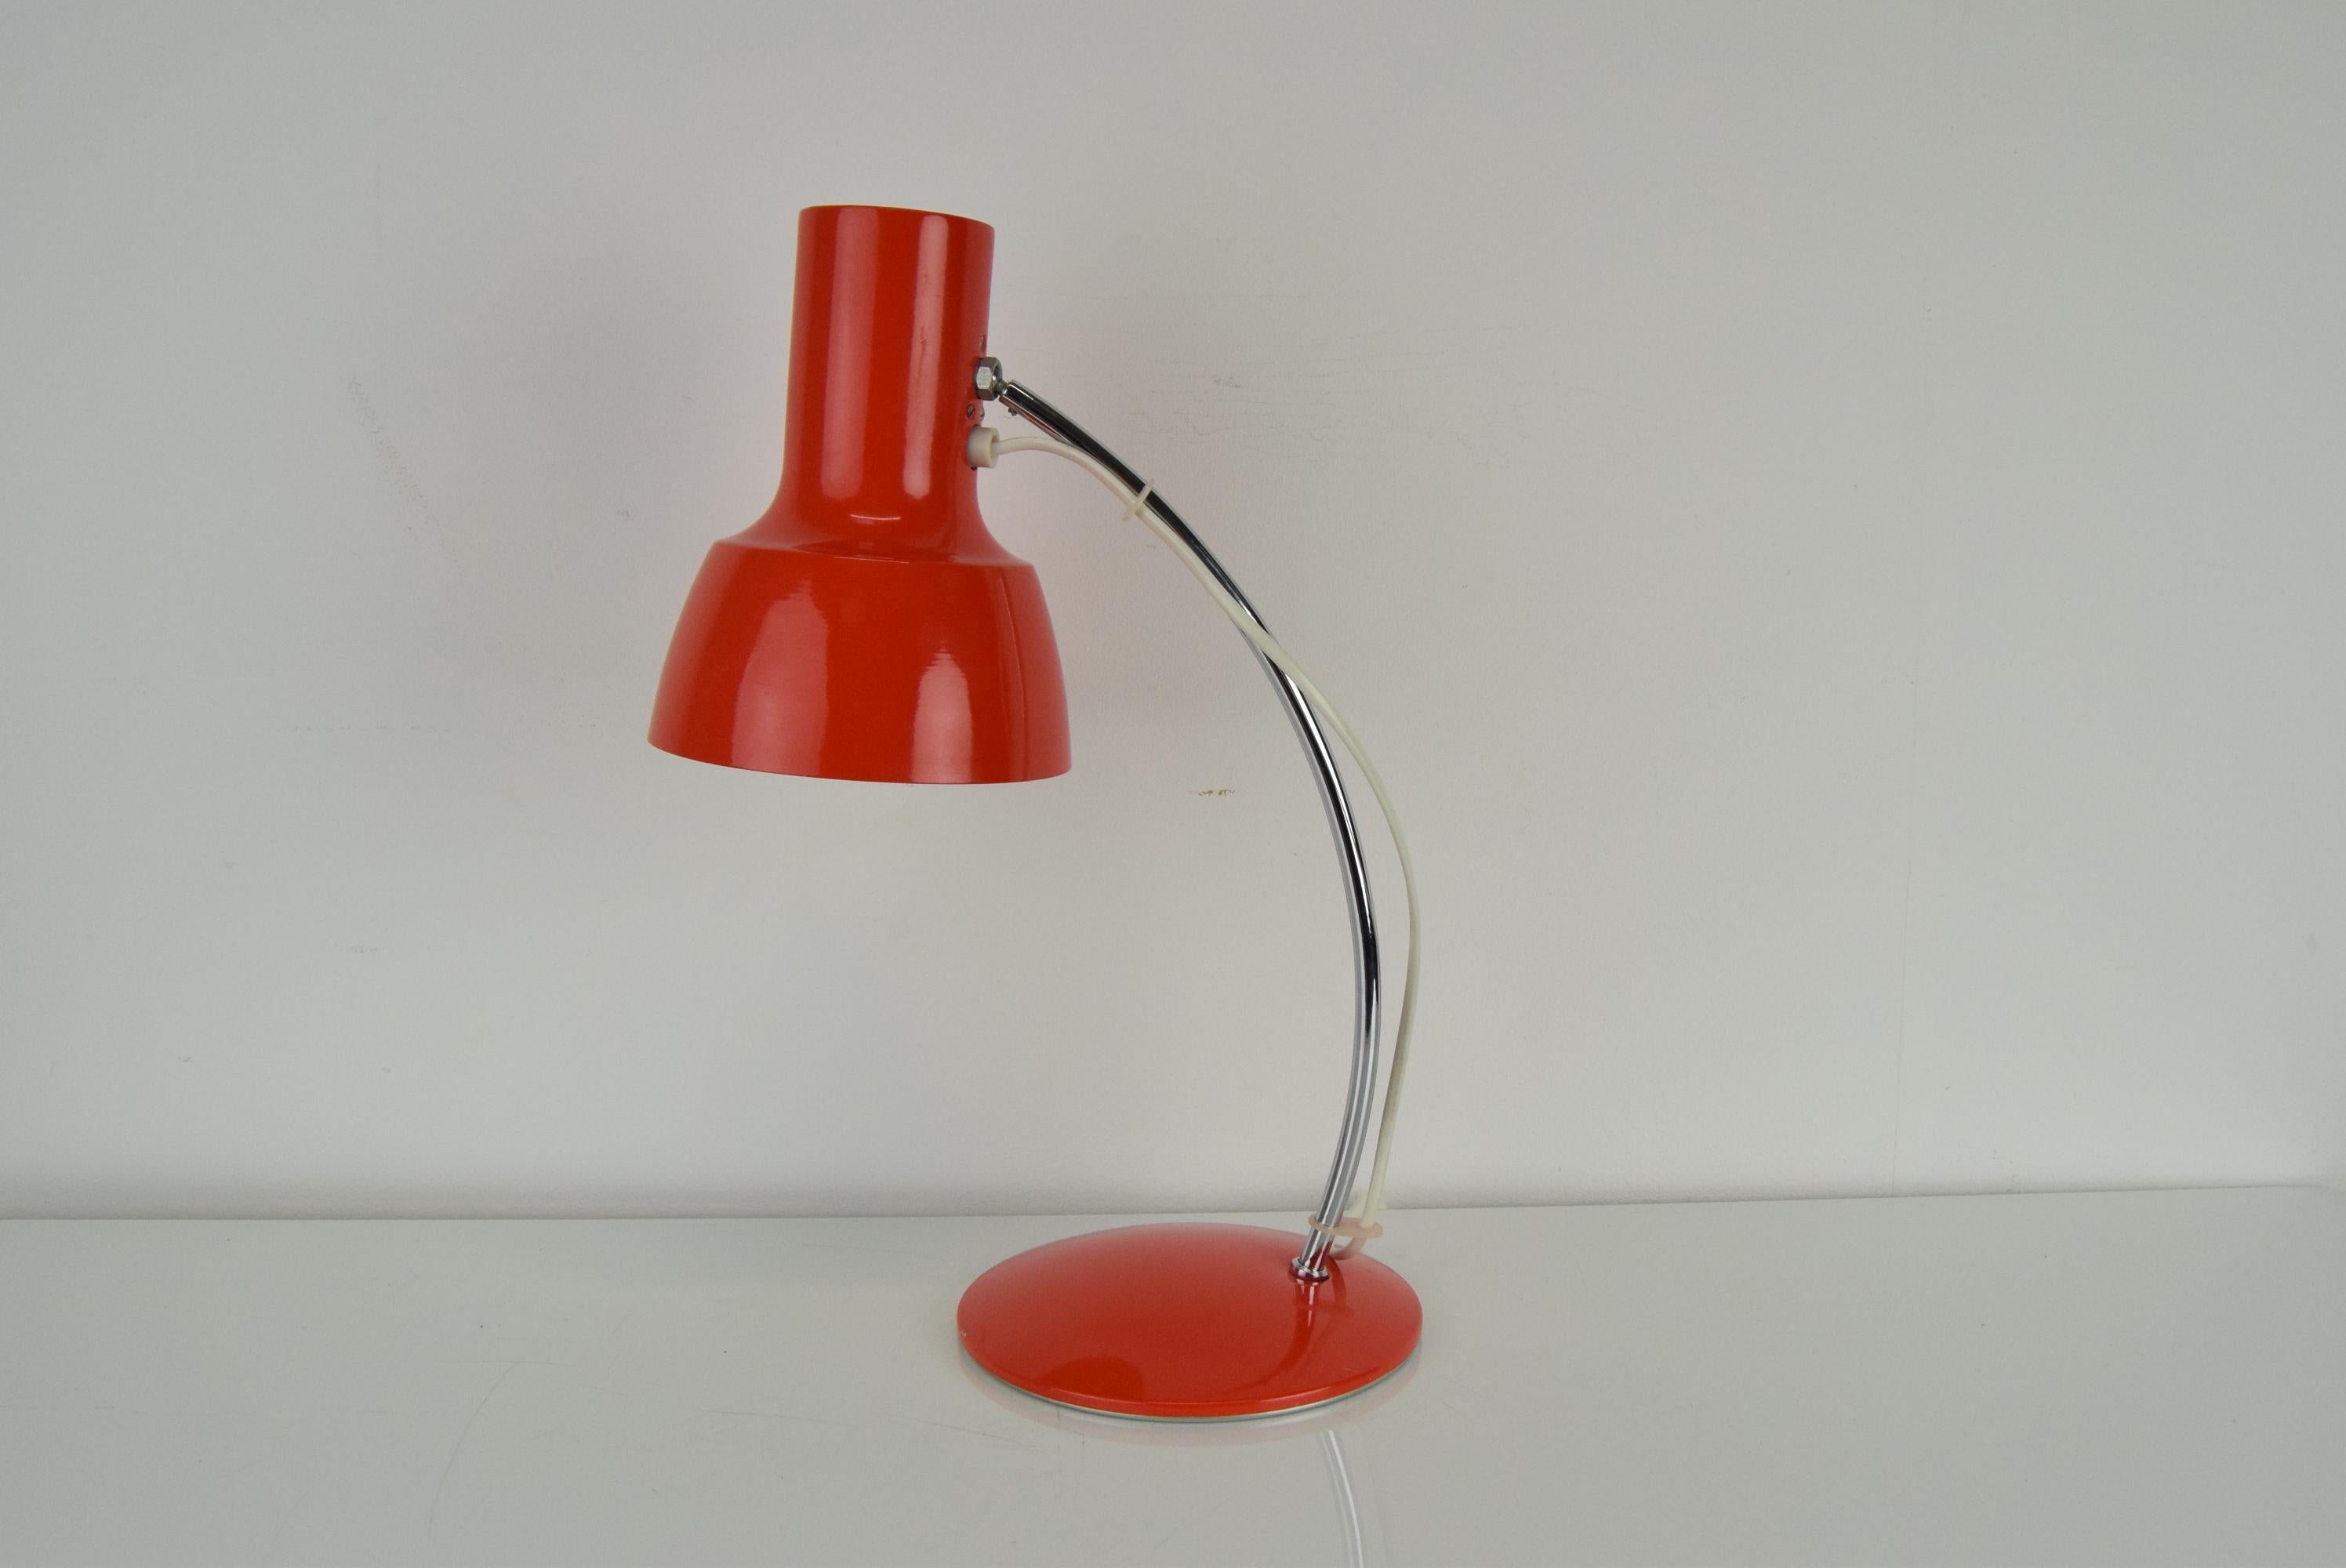 Made in Czechoslovakia 
Made of Lacquered Metal,Chrome
Adjustable shade
With aged patina
Re-polished
1xE27 or E26 bulb
US adapter included
Good Original condition.